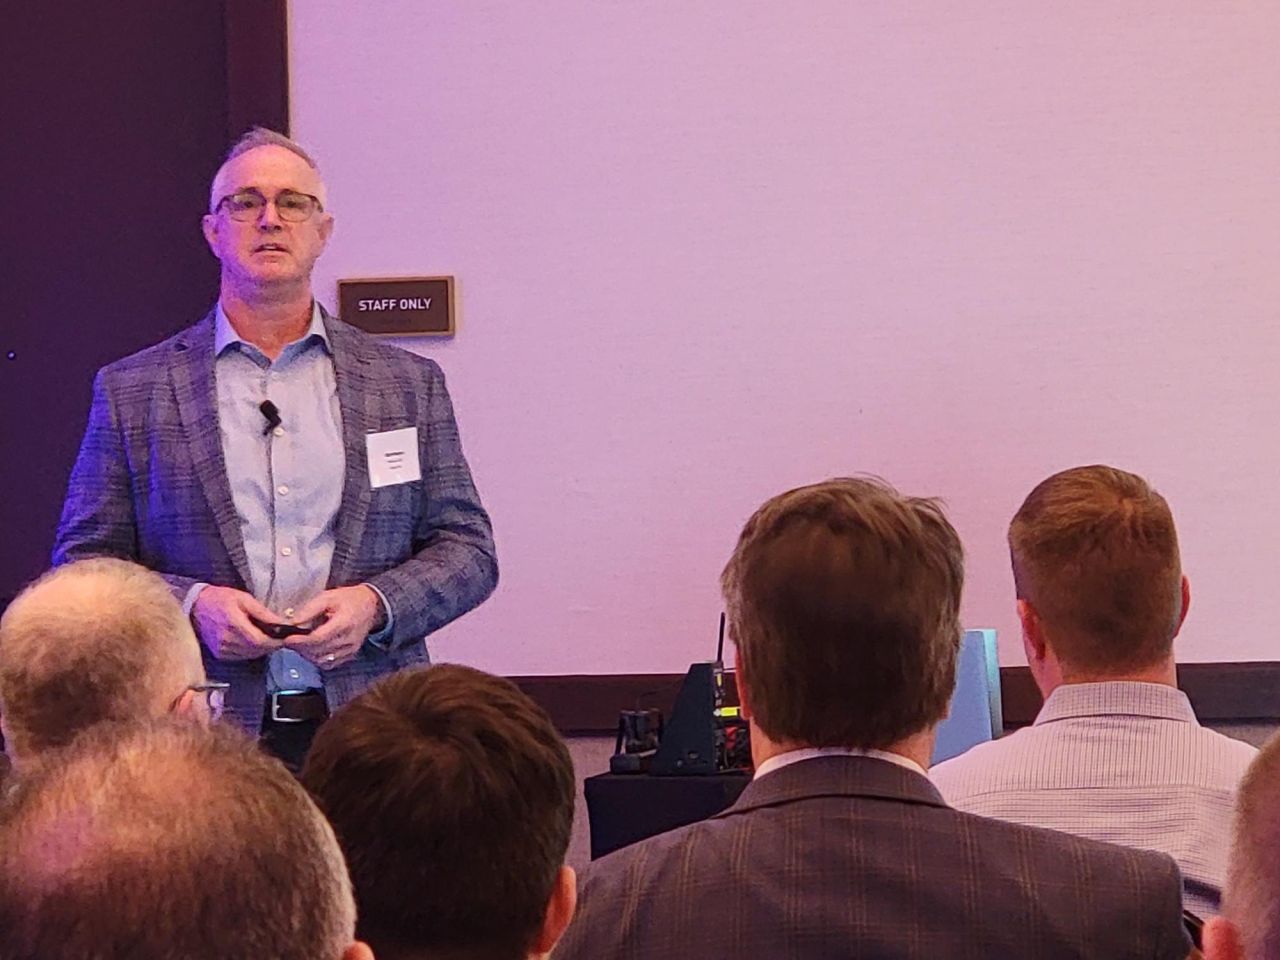 Chris Hughes, CEO of Arcadia Cold, had attendees at Netlogistik Innovation Day on the edge of their seats as he discussed "Navigating the Frozen Frontier of Digital Transformation and Innovation in Cold Storage Operations."